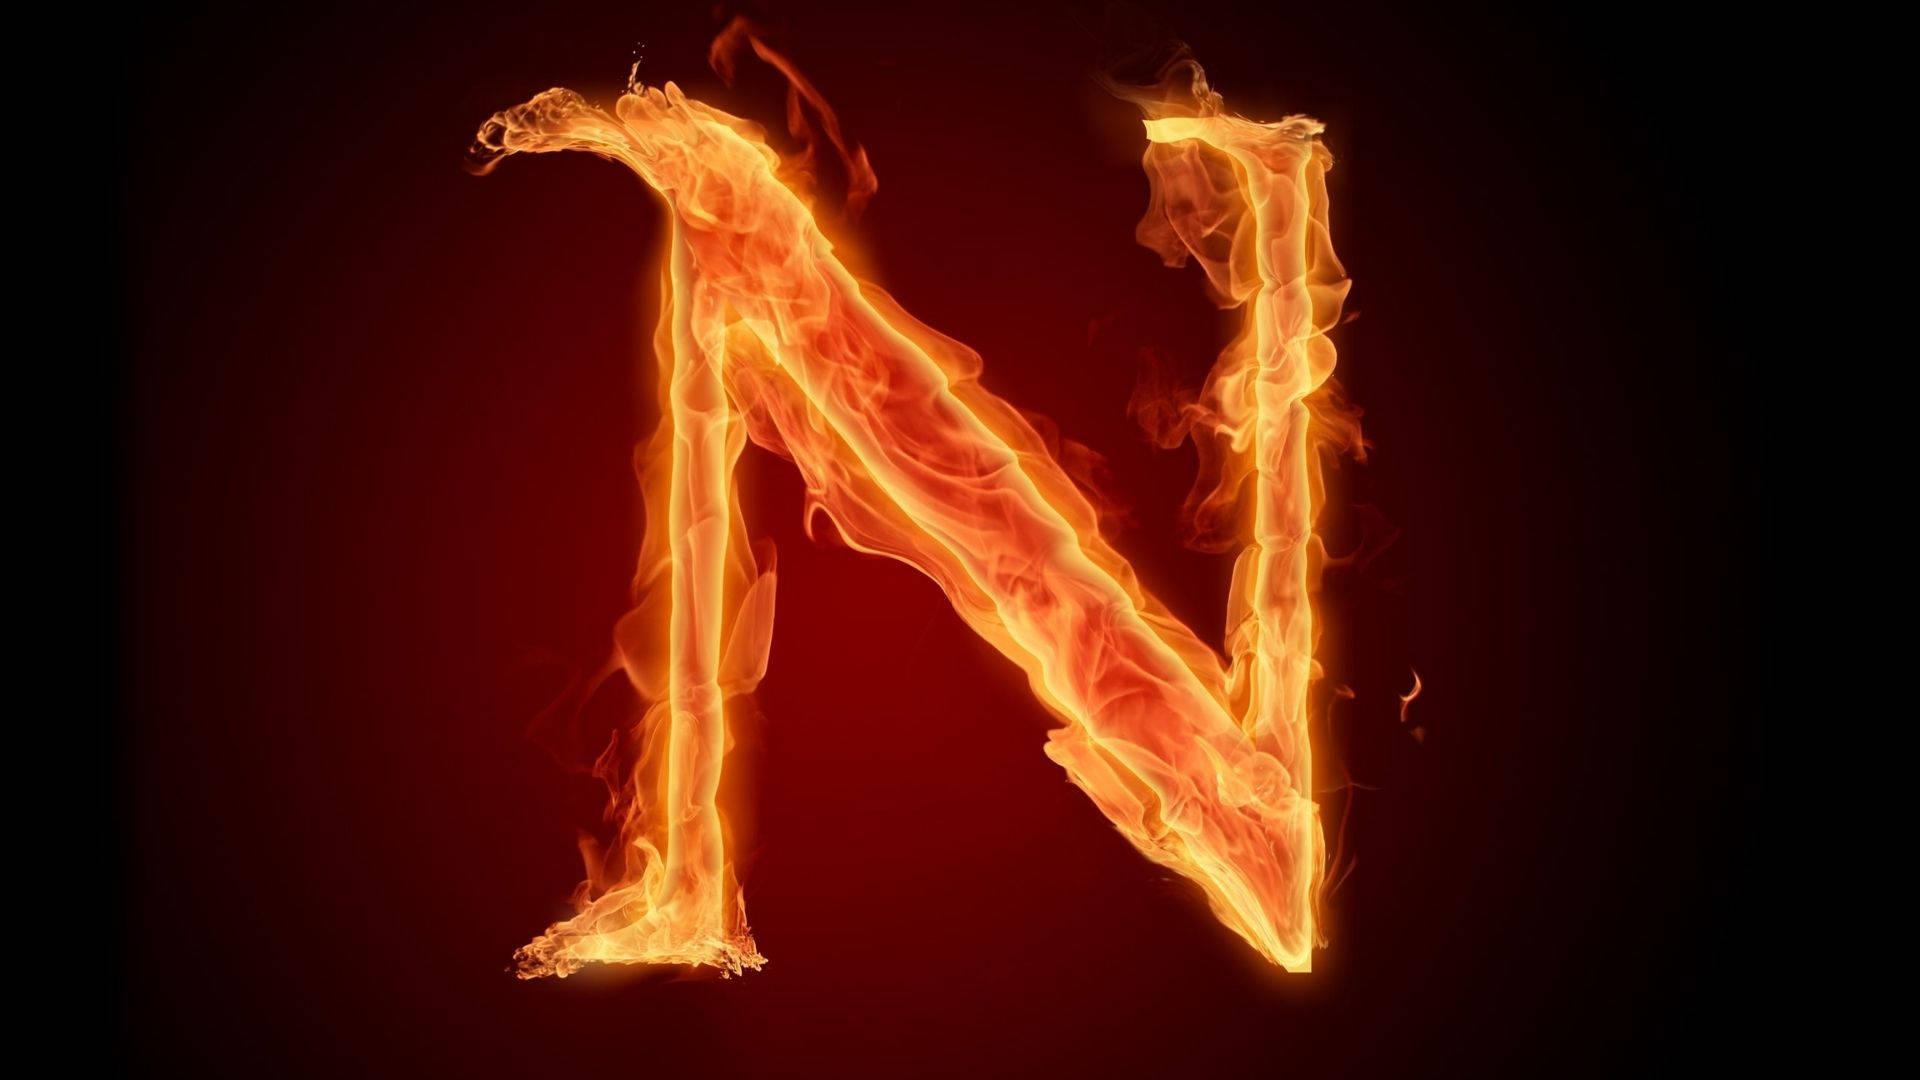 Mesmerizing Neon Letter 'n' From Alphabet Series Background